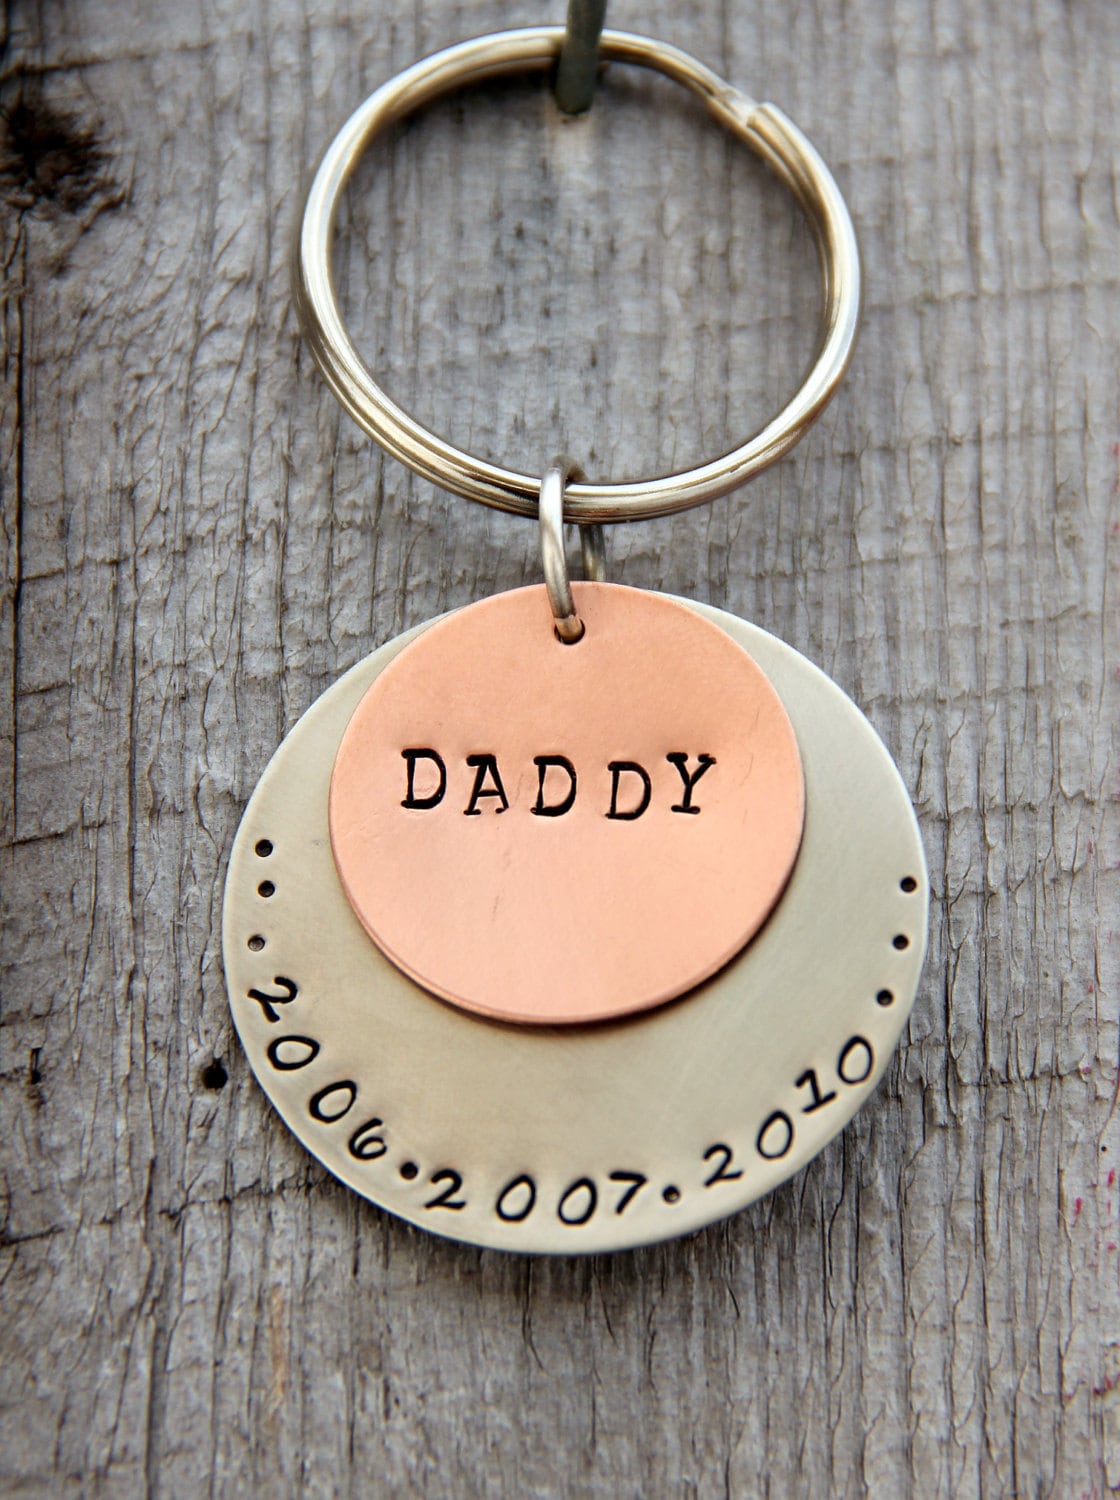 Dads Gift : dad birthday gifts - craftshady - craftshady : Need a gift for a dad who has everything?